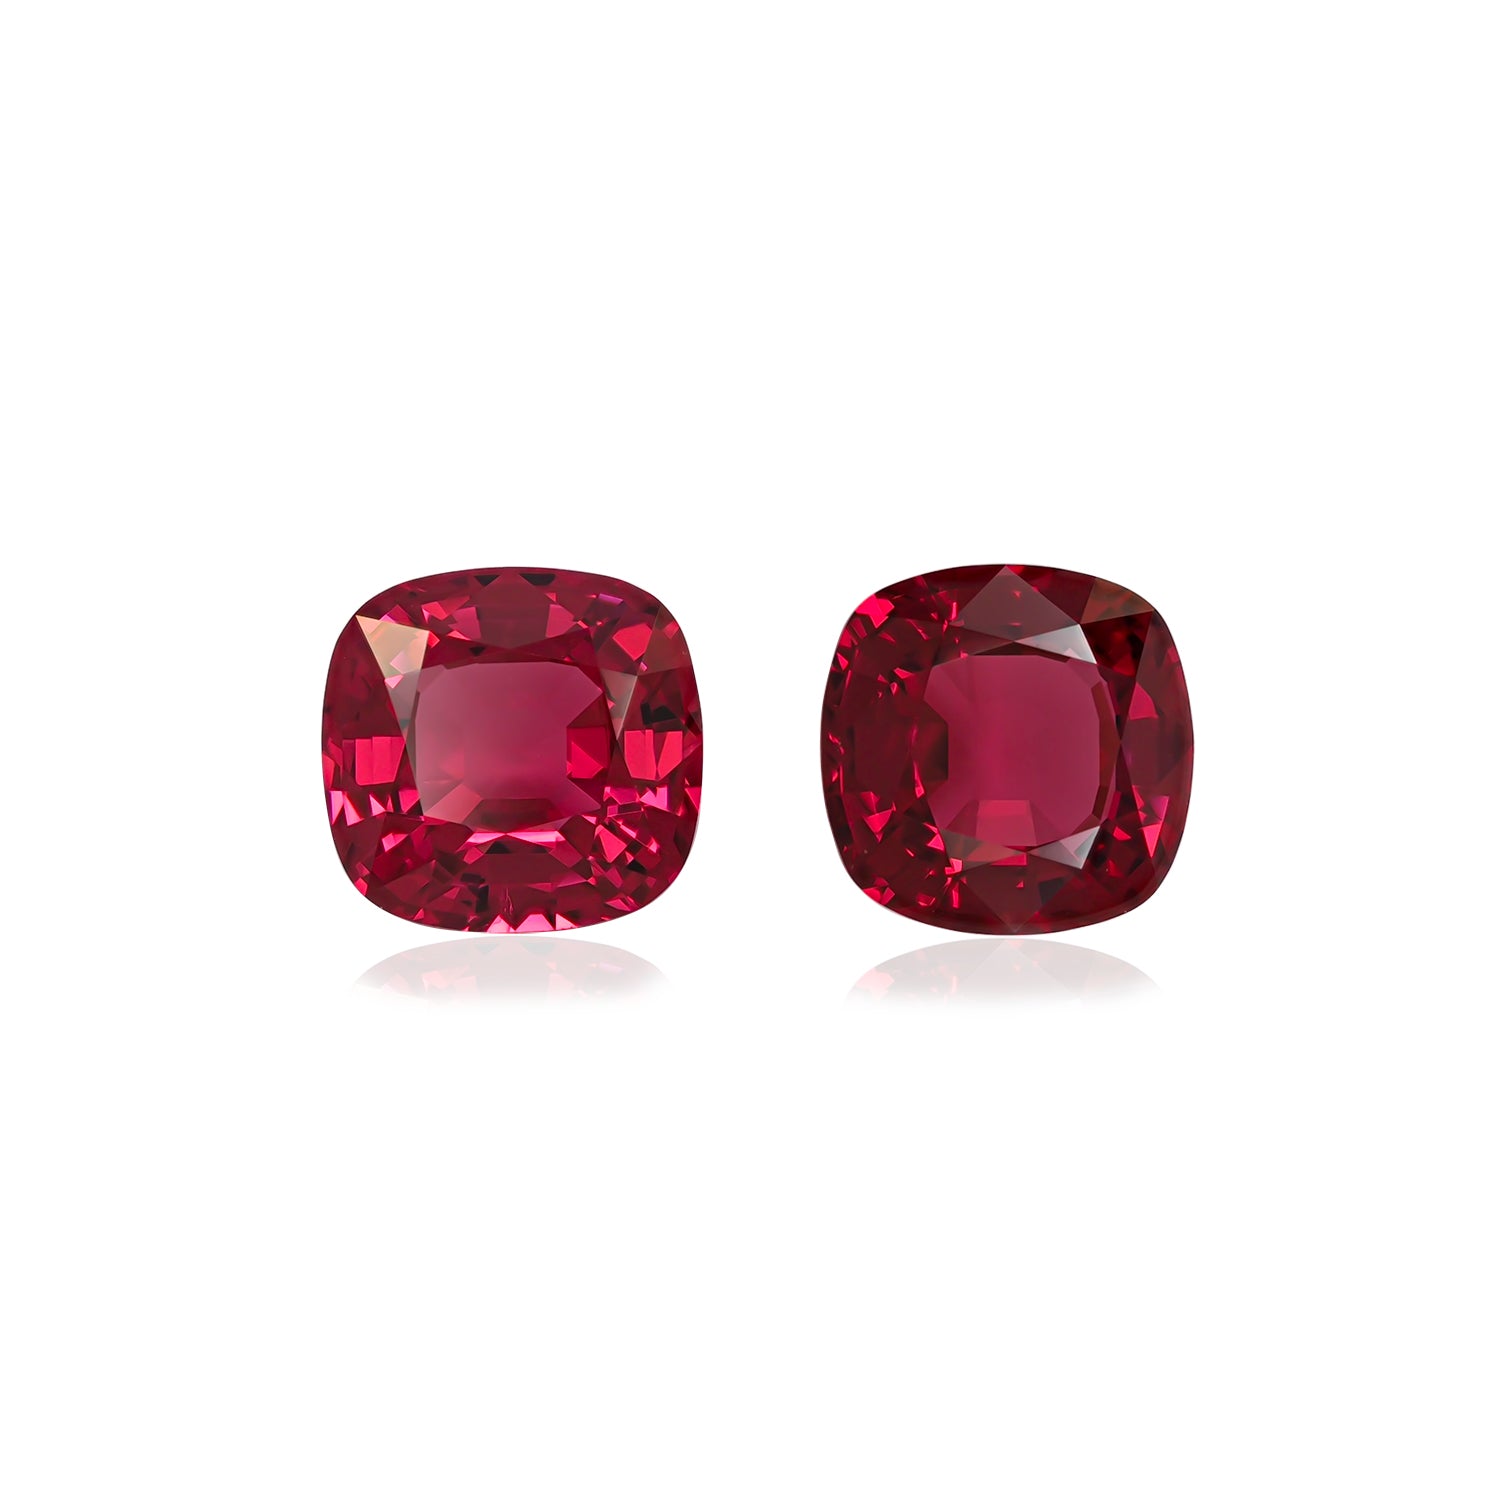 Cherry Red Spinel 4.44 CT/2